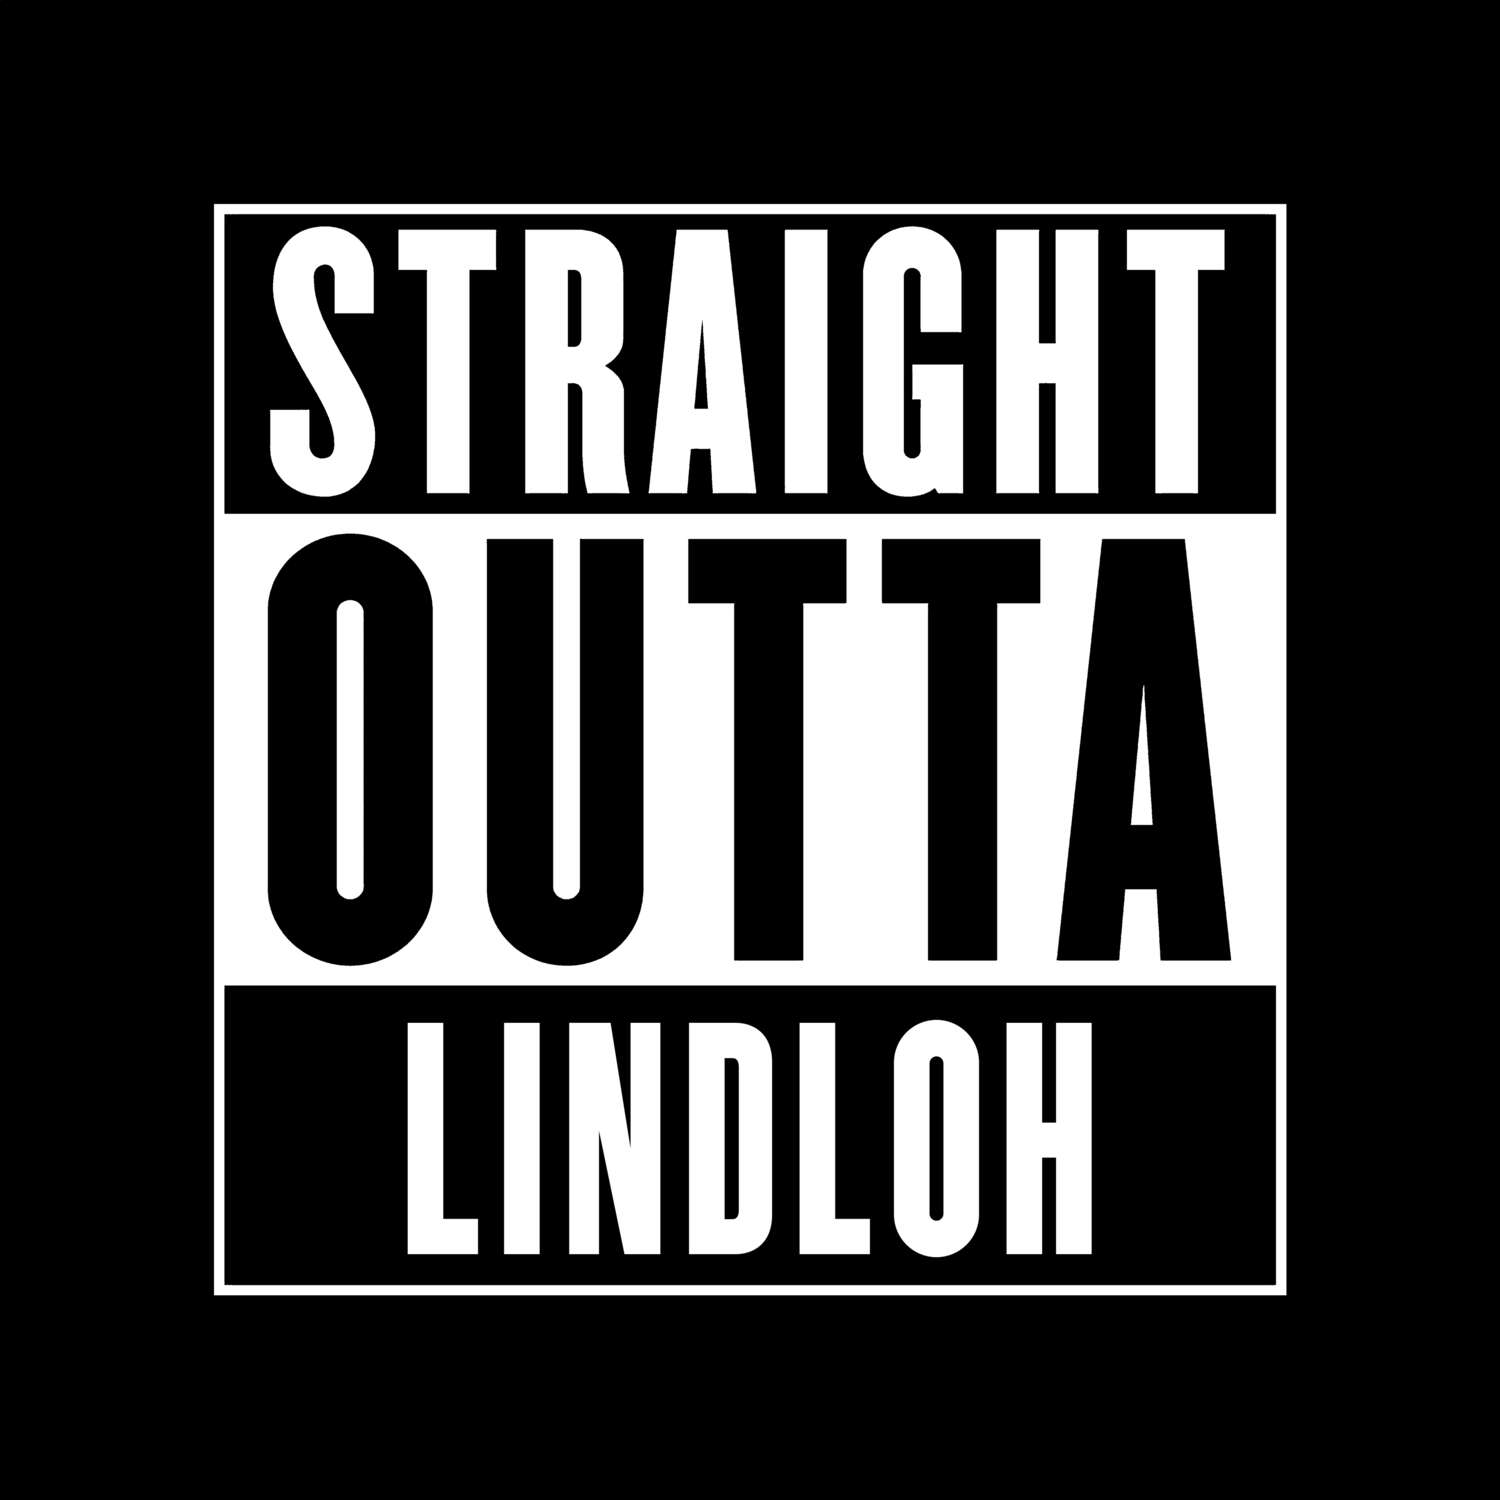 Lindloh T-Shirt »Straight Outta«